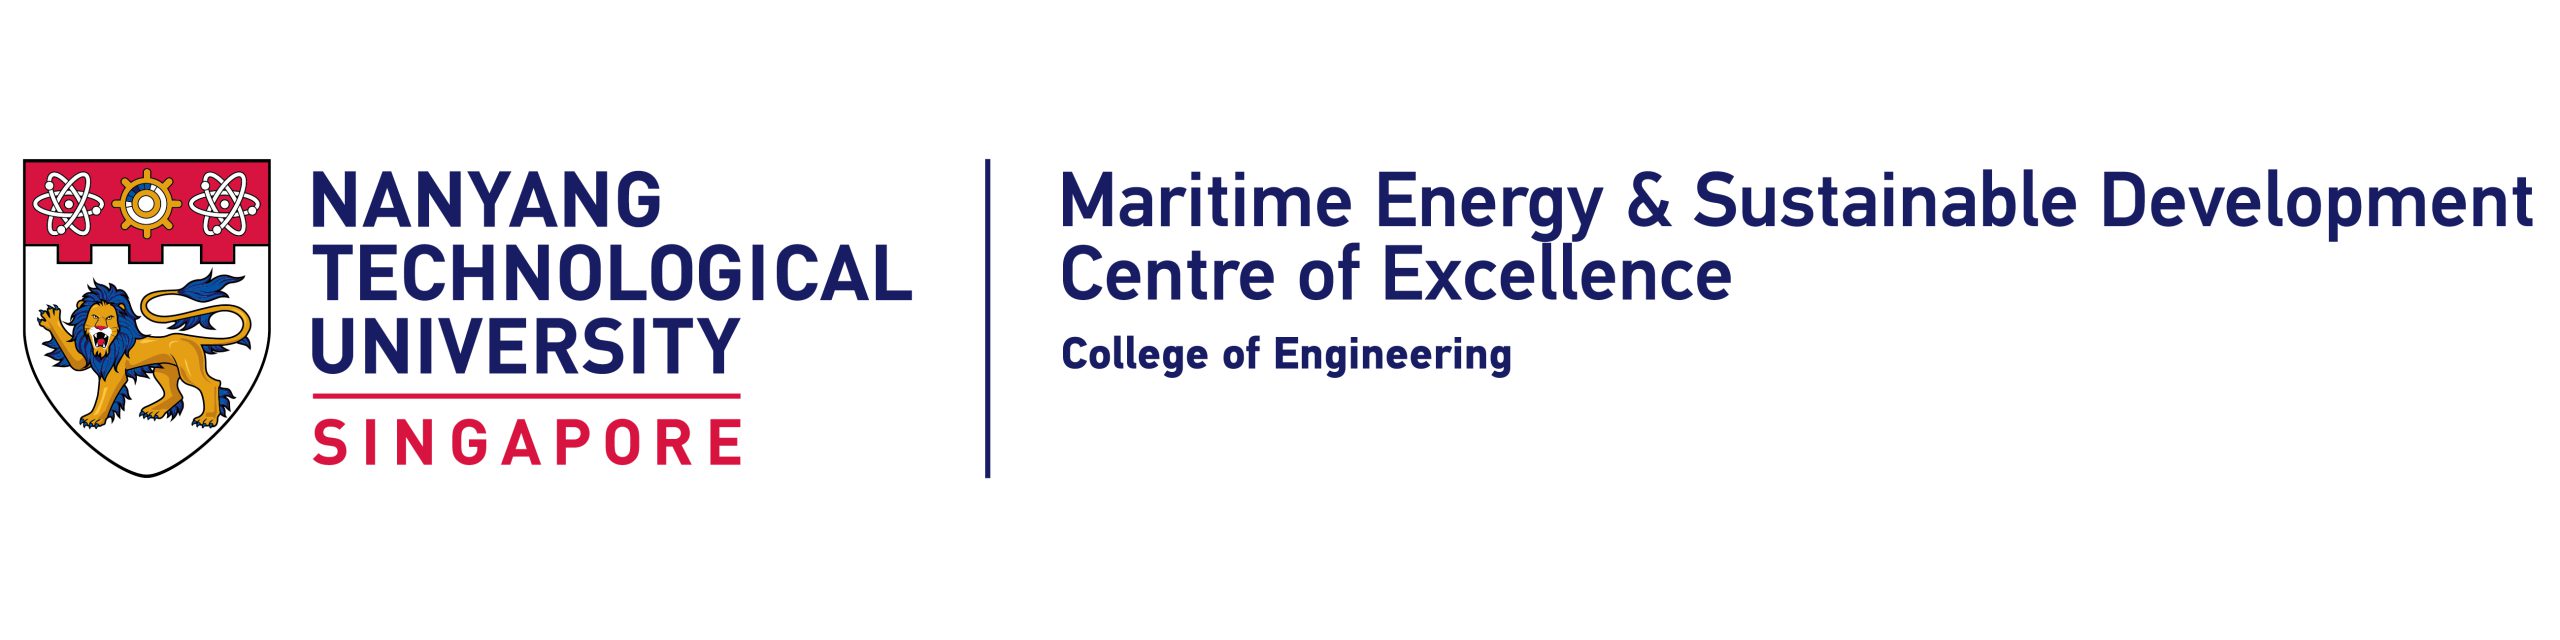 NTU Maritime Energy & Sustainable Development Centre of Excellence